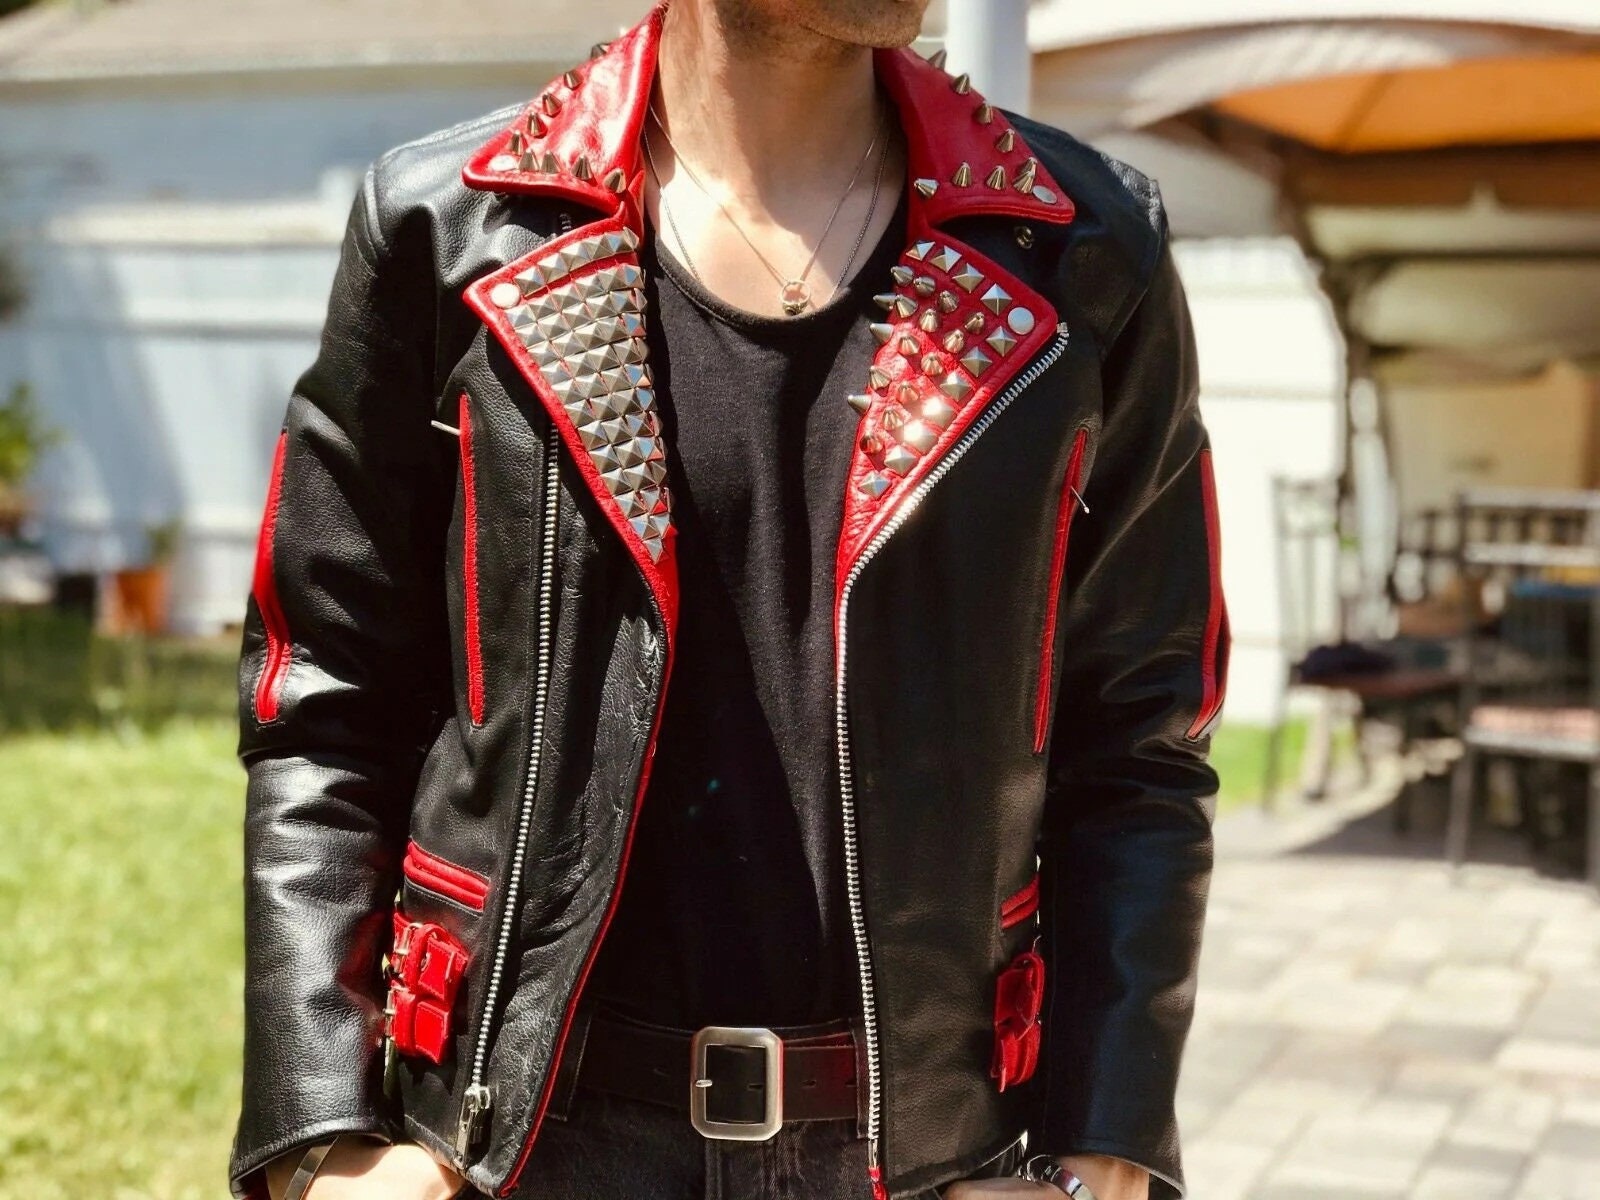 Men Black Leather Jacket With Golden Chain